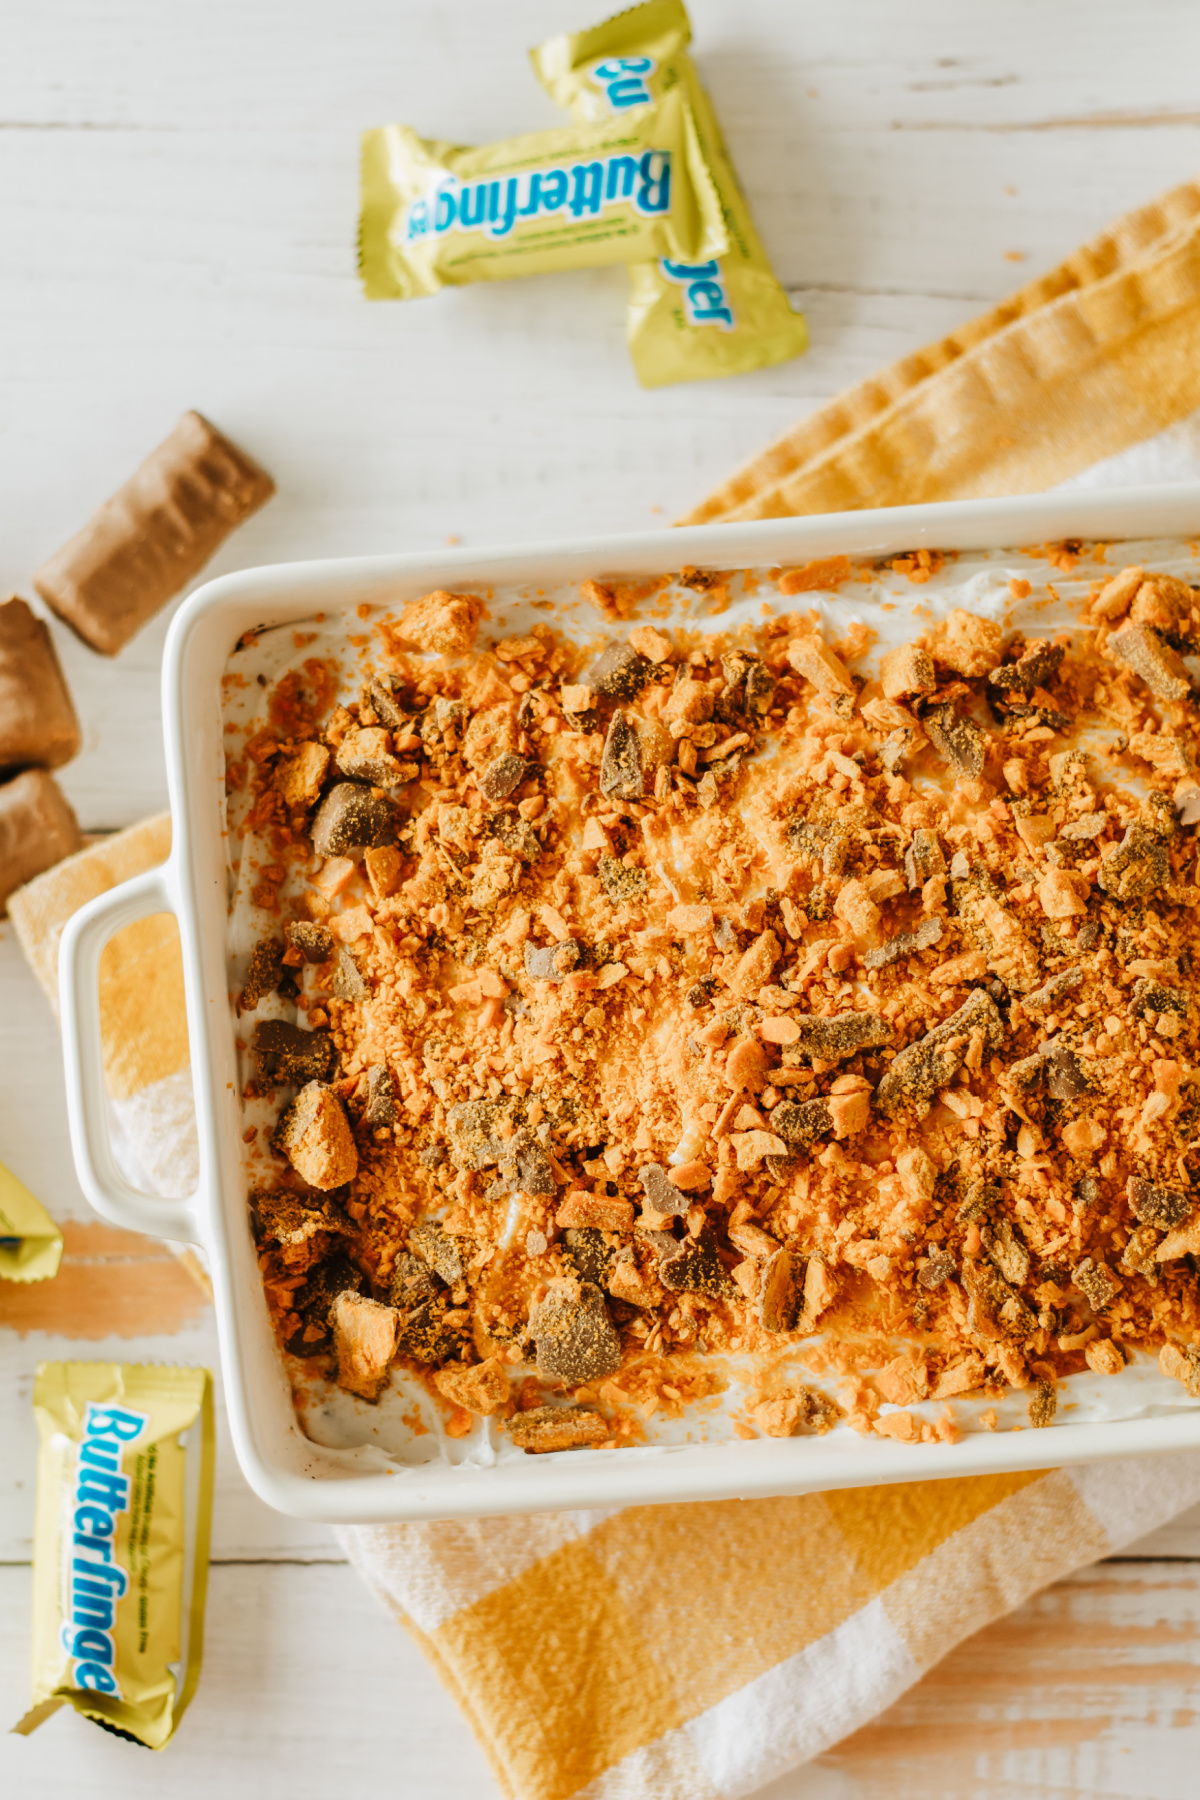 A baking dish with a cake topped with Butterfinger cookies